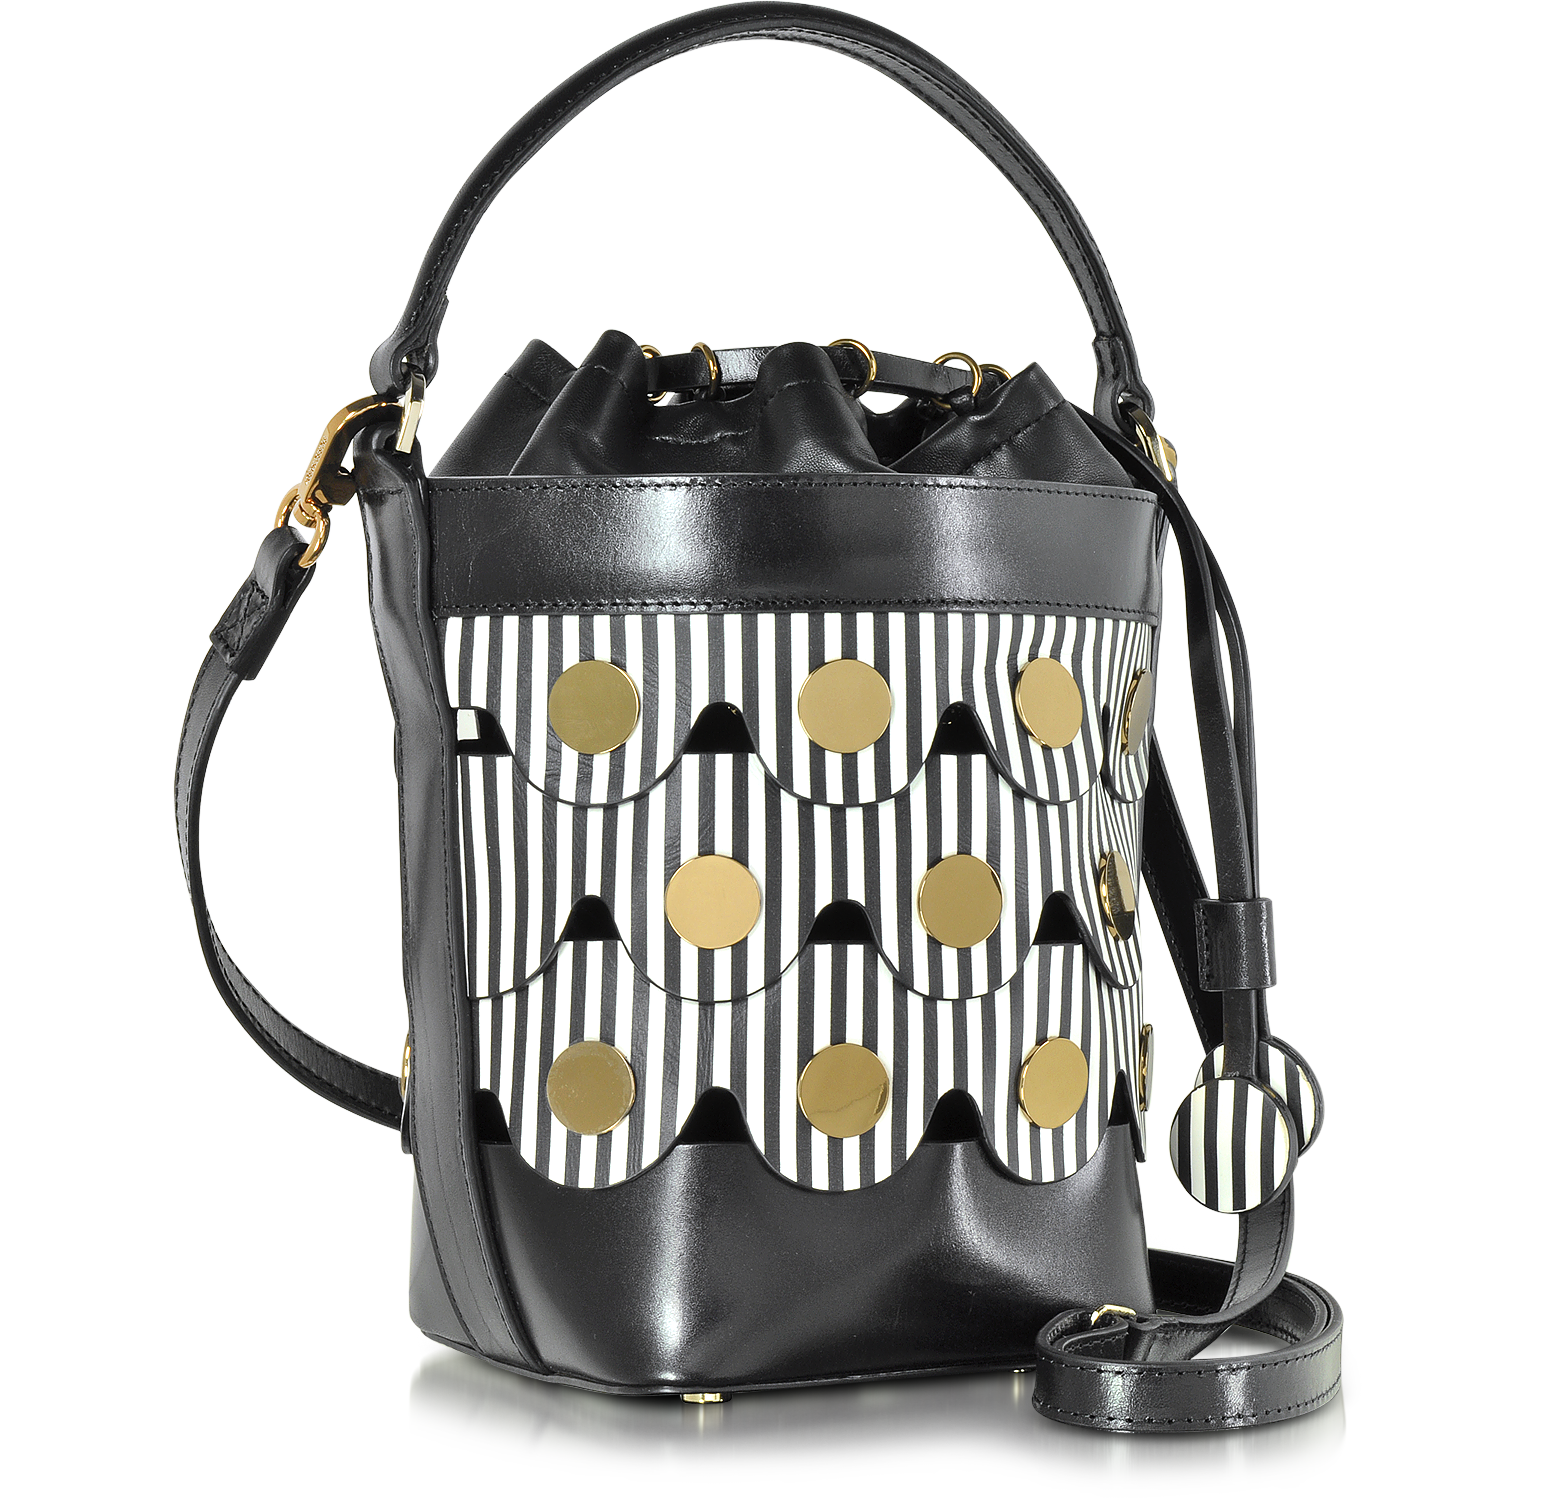 Pierre Hardy Black & White Stripes Leather Penny Bucket Bag at FORZIERI